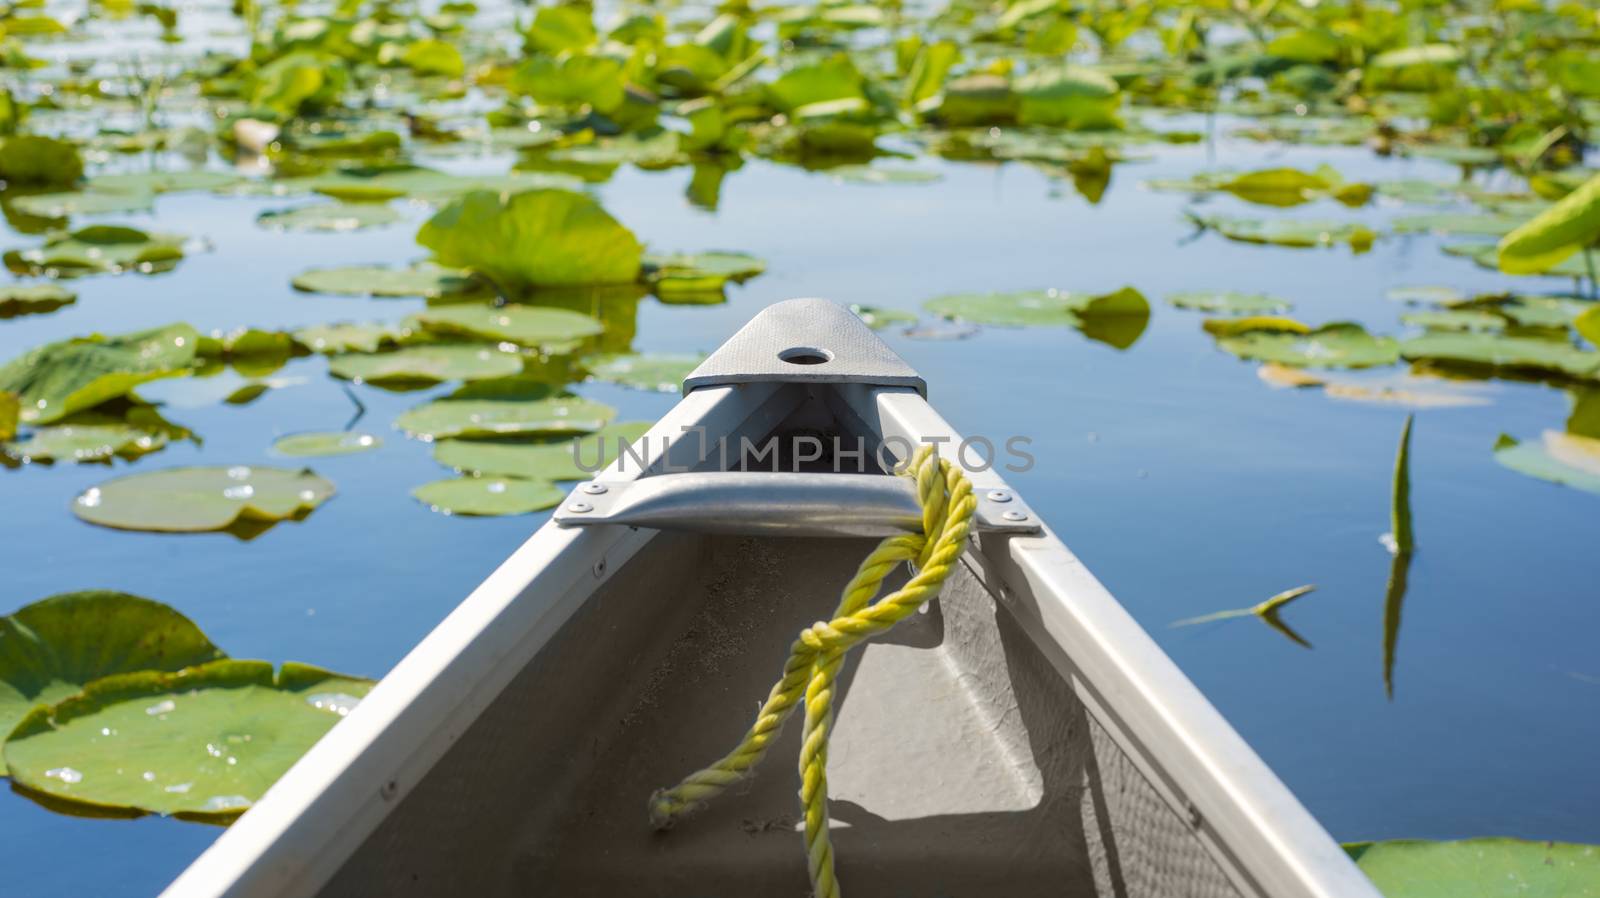 Canoe among lily pads by rgbspace